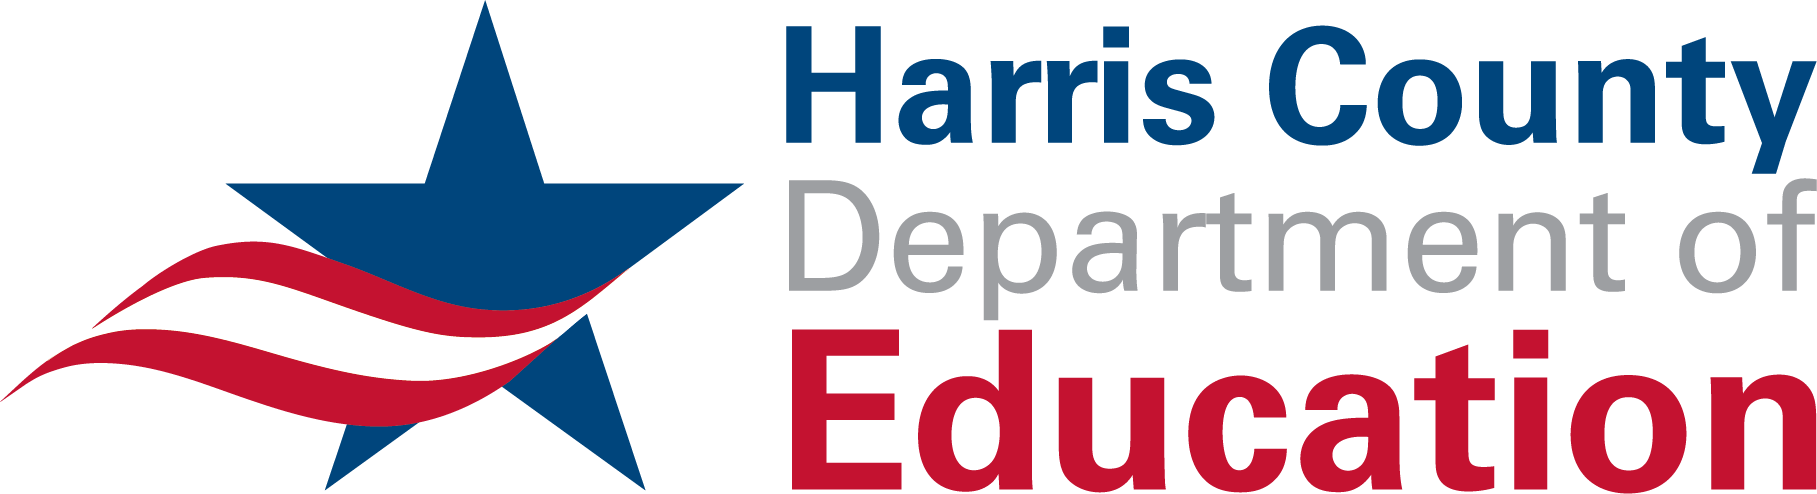 See the Impact - Logo - https://s39939.pcdn.co/wp-content/uploads/2020/03/Education_Harris-County.png